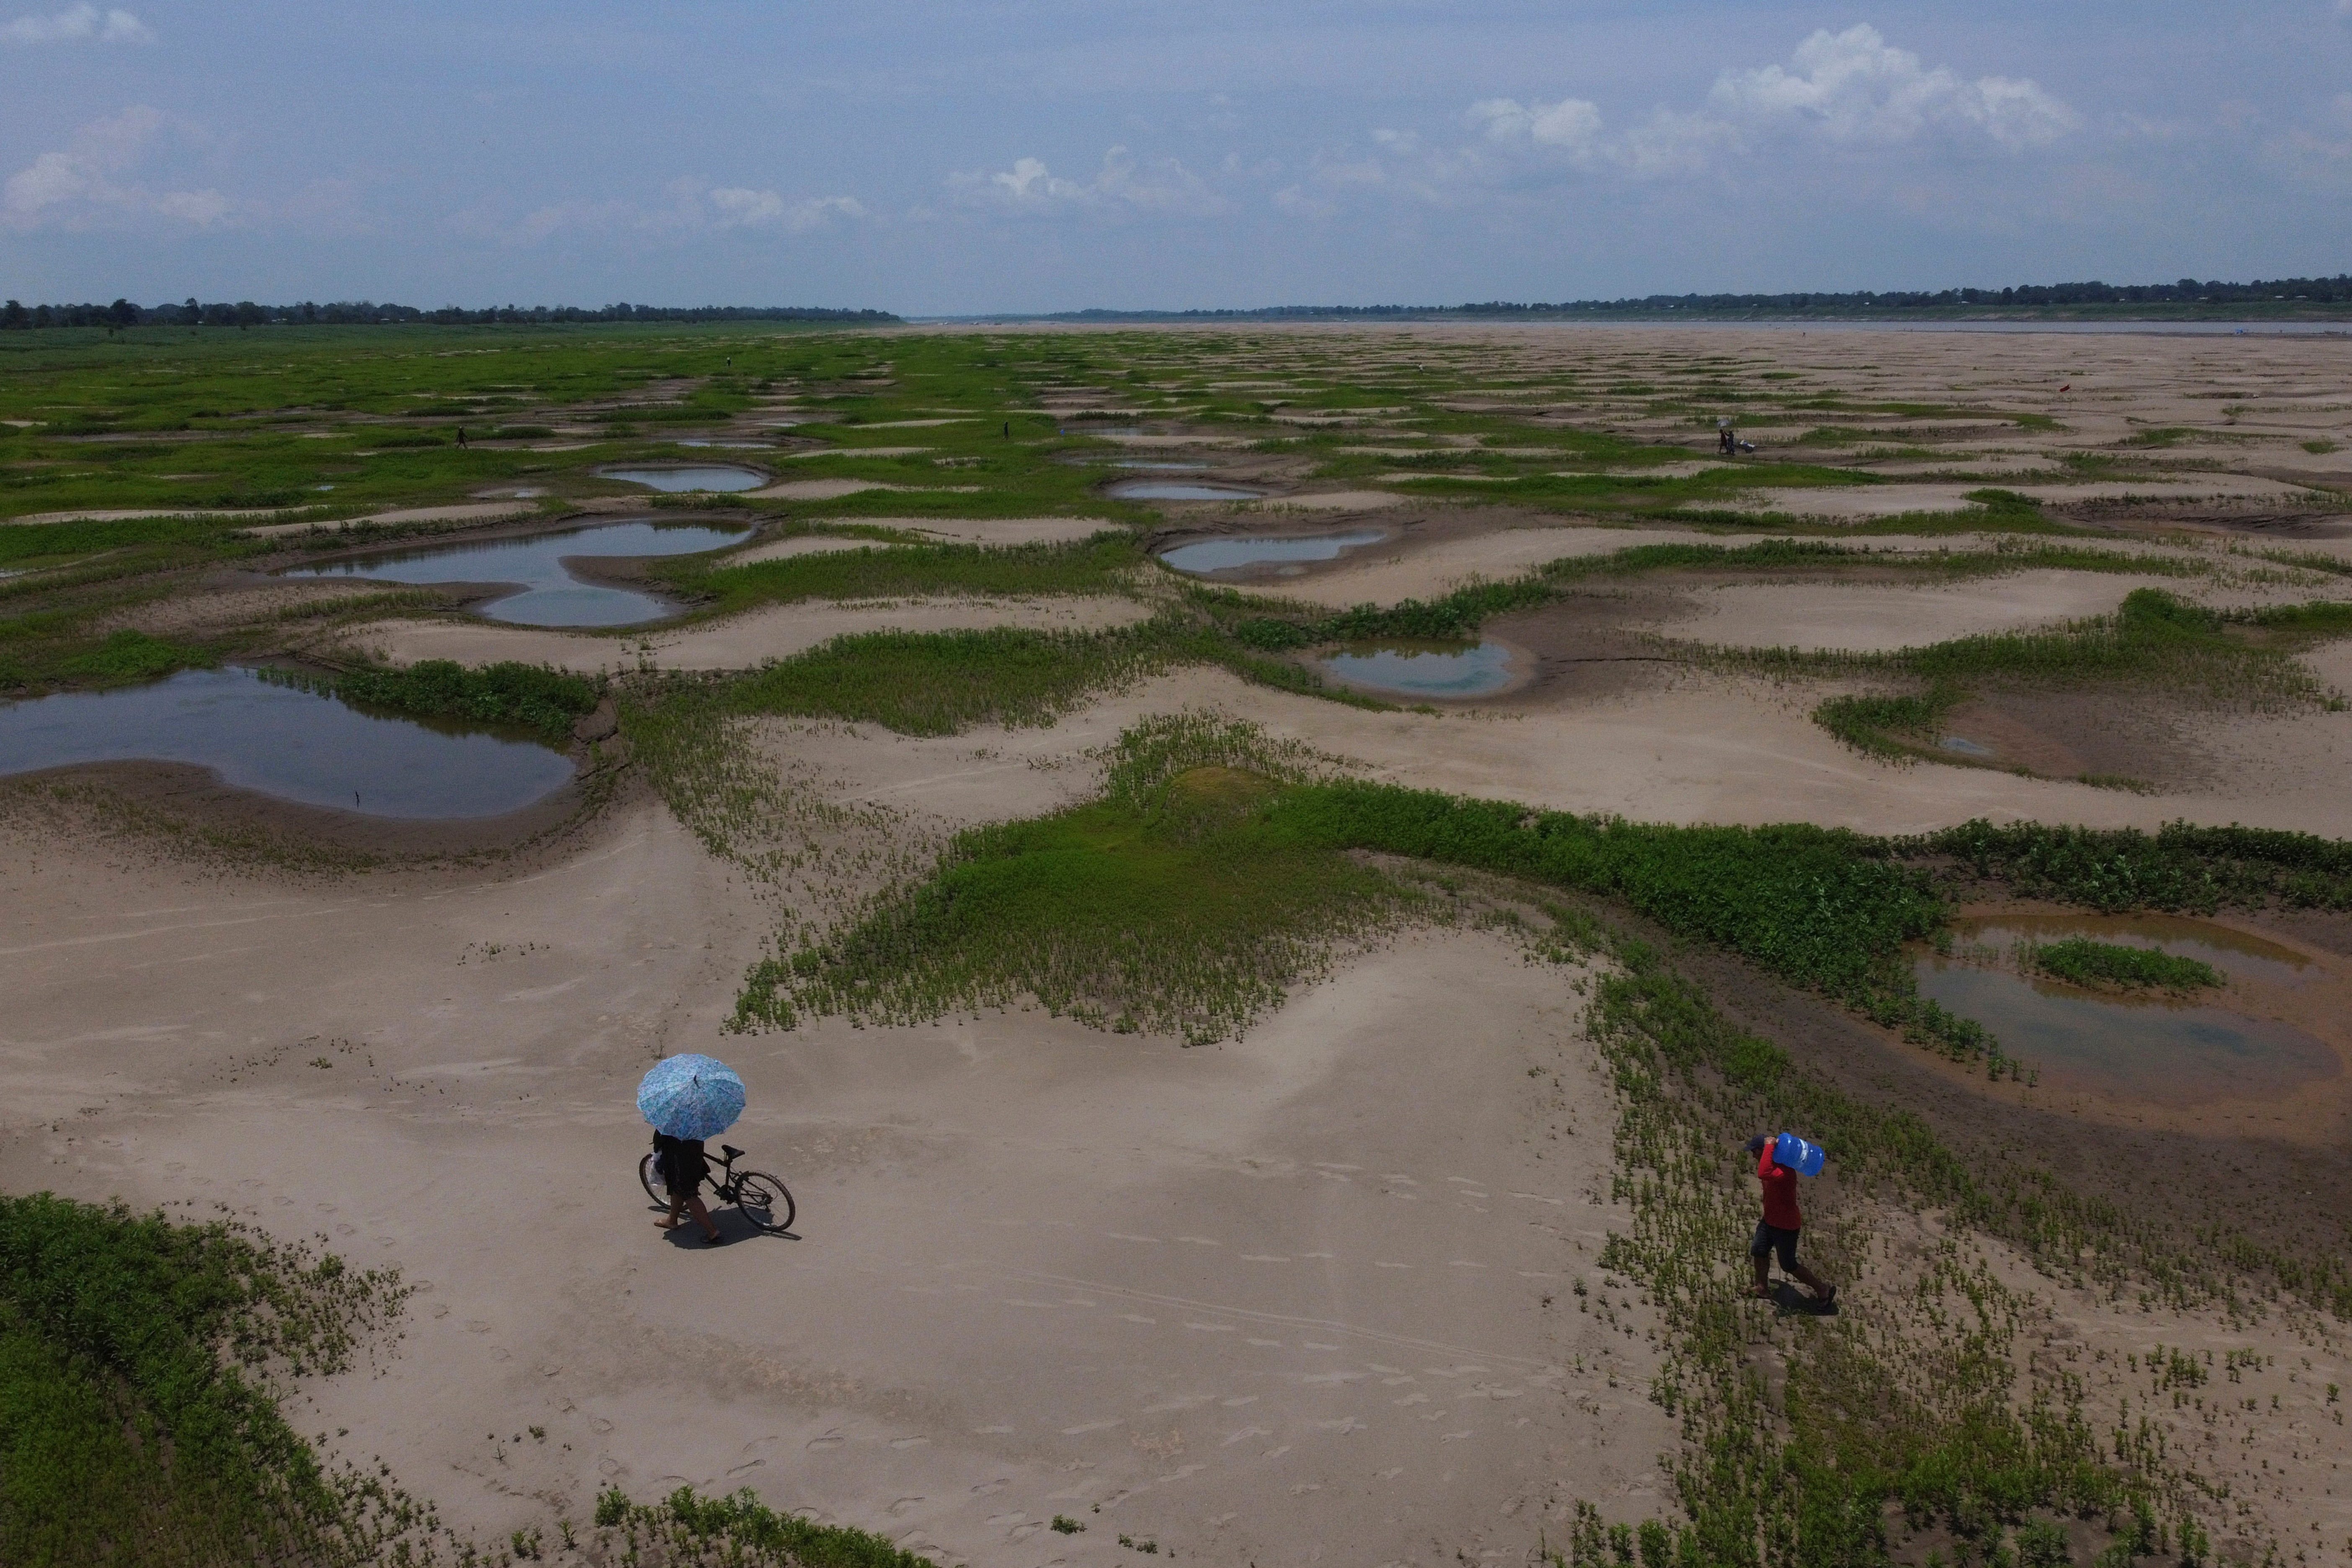 Residents of a riverside community carry food and containers of drinking water due to the ongoing drought and high temperatures that affect the region of the Solimoes River in Amazonas state, Brazil last month. The climate crisis is driving drought and water shortages around the world